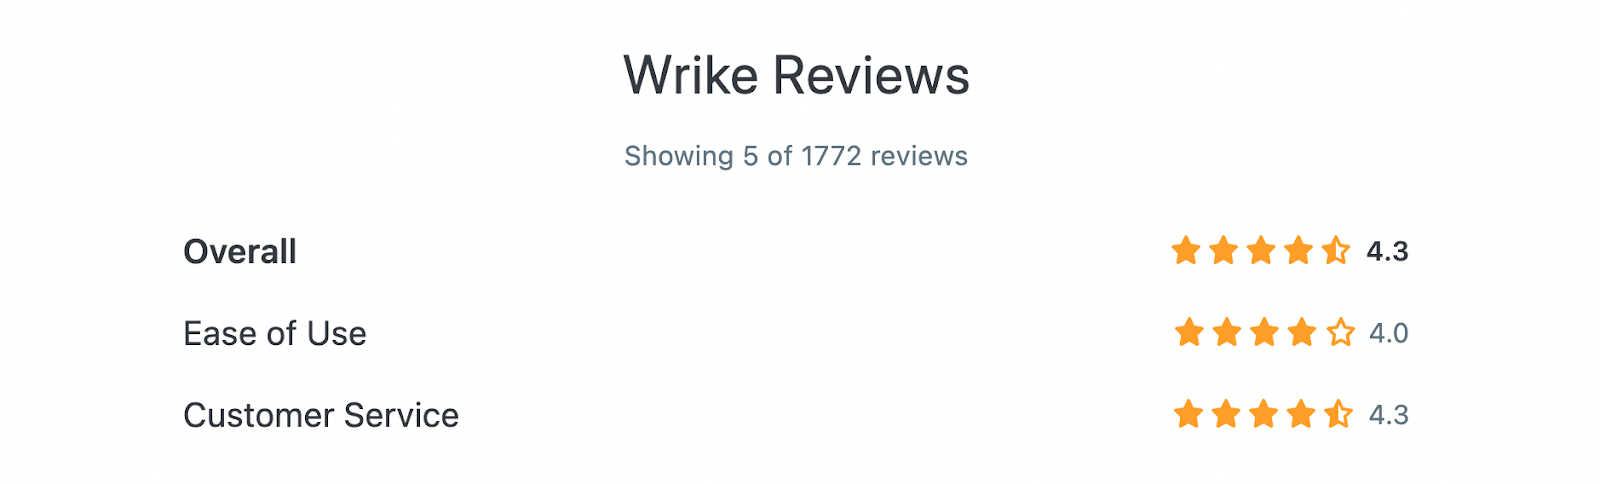 Wrike reviews on Capterra (Overall: 4.3, Ease of Use: 4.0, Customer Service: 4.3)